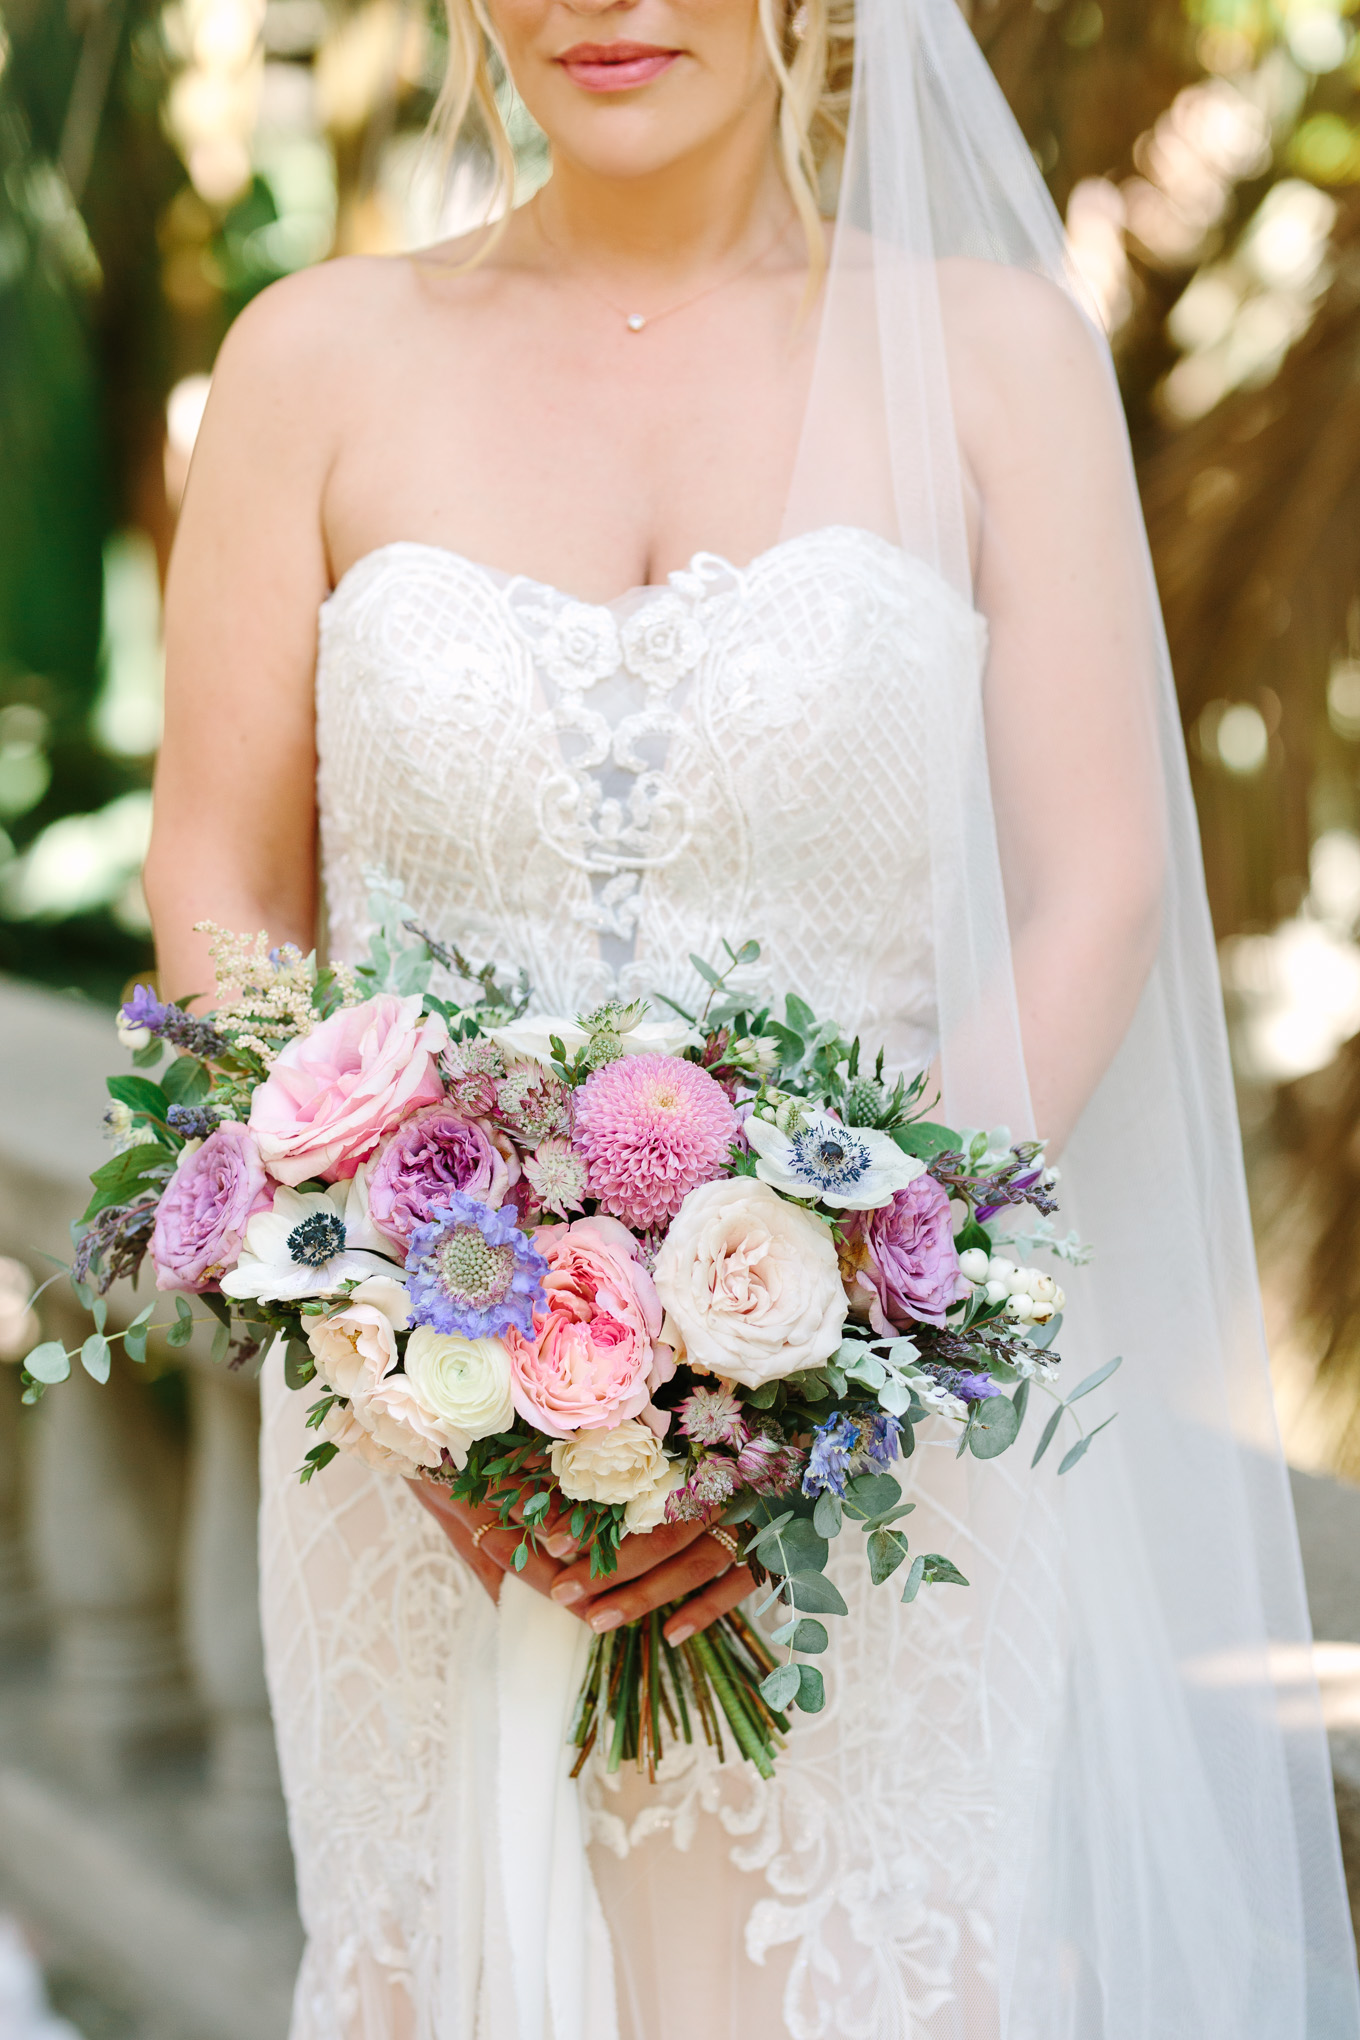 Bride with lavender and pink bouquet at Houdini Estate wedding | Best Southern California Garden Wedding Venues | Colorful and elevated wedding photography for fun-loving couples | #gardenvenue #weddingvenue #socalweddingvenue #bouquetideas #uniquebouquet   Source: Mary Costa Photography | Los Angeles 